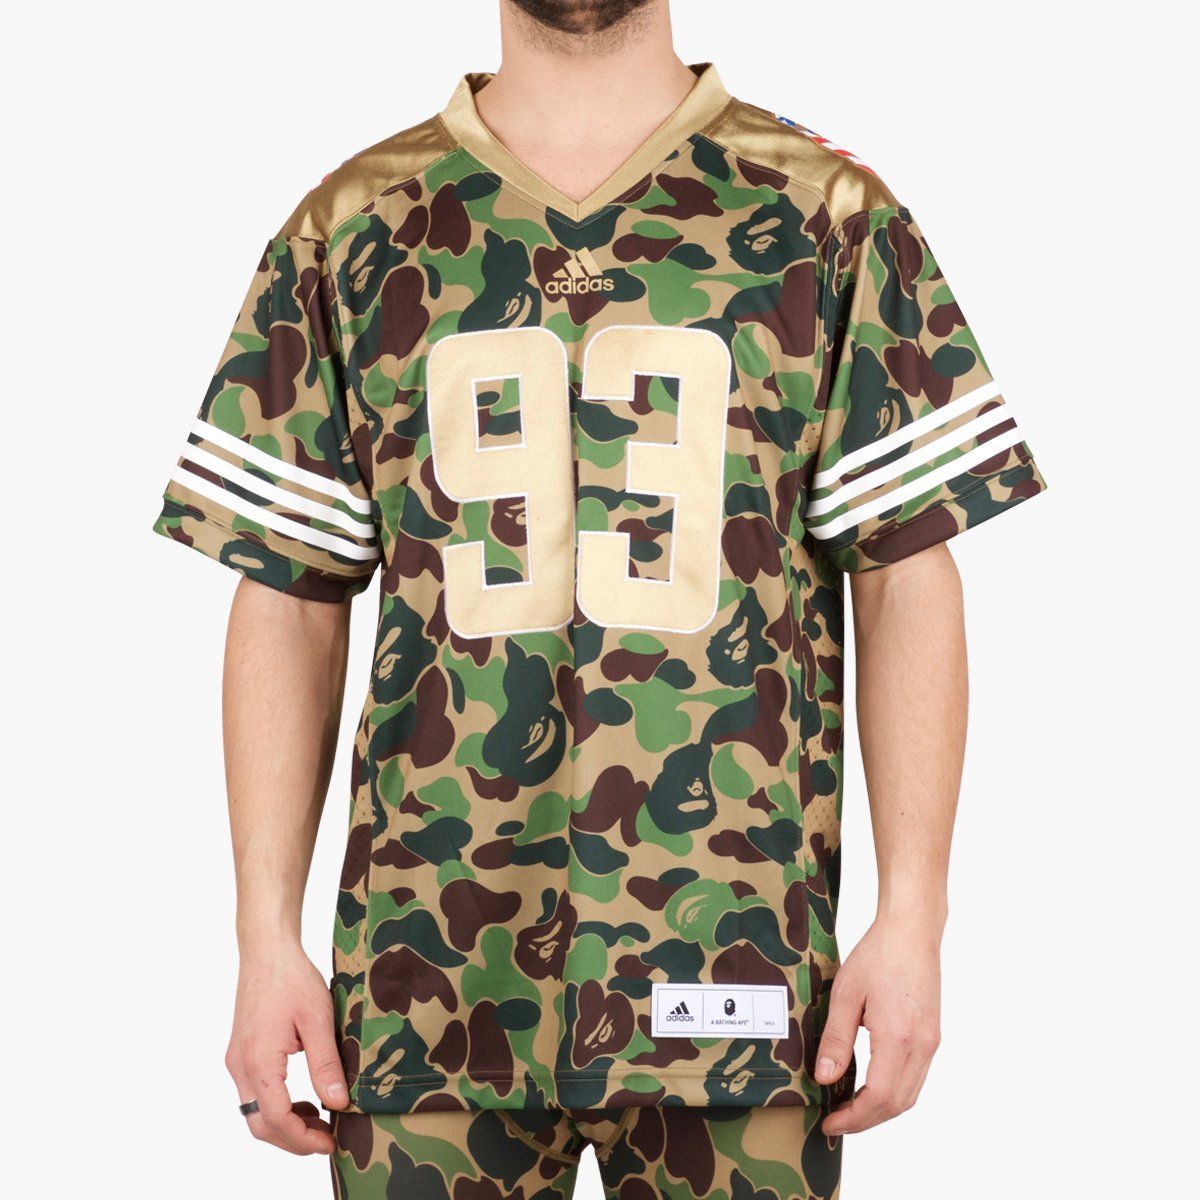 Outfit Myth on Twitter: "ad: Full Size Run Of The Bape x adidas 'Super Bowl' Jersey At &gt;&gt; https://t.co/ZEwcsiREIZ" Twitter